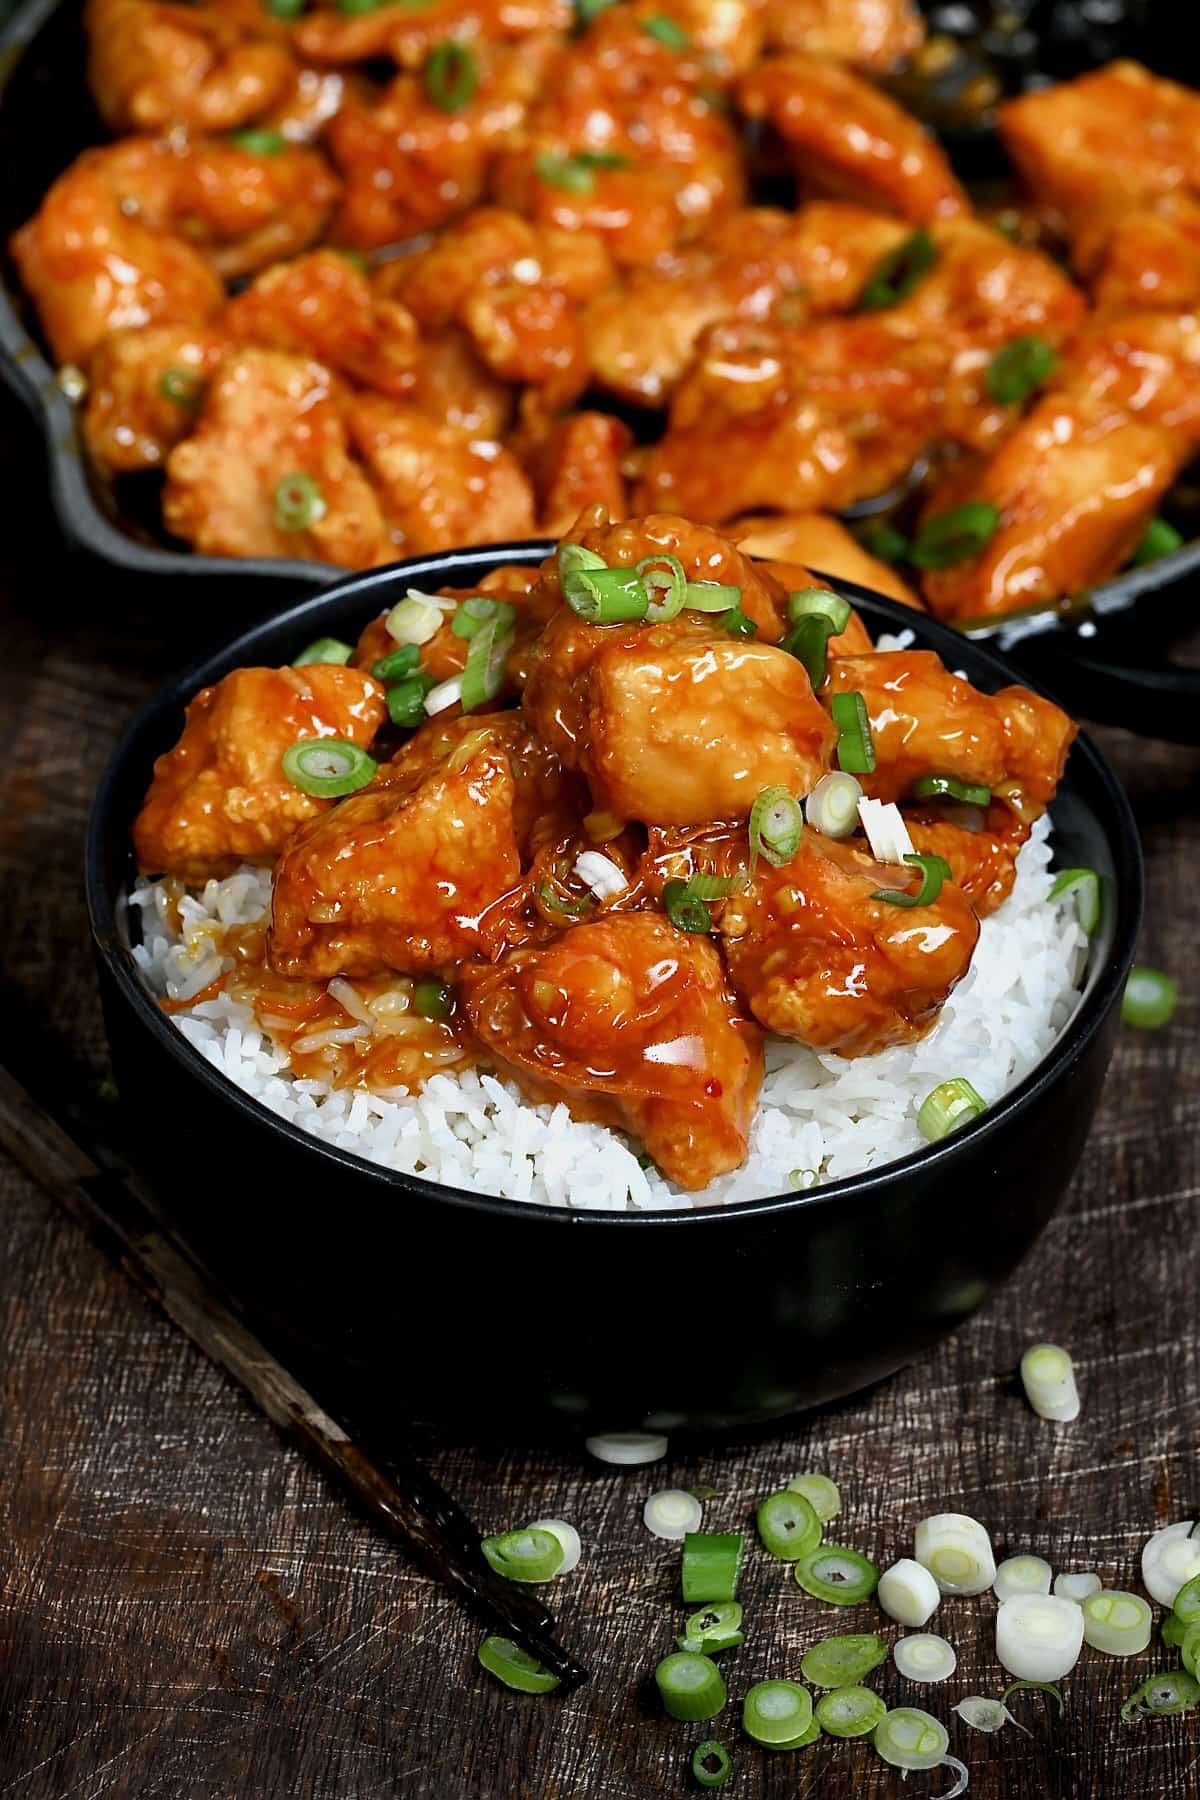 A serving of orange chicken with rice